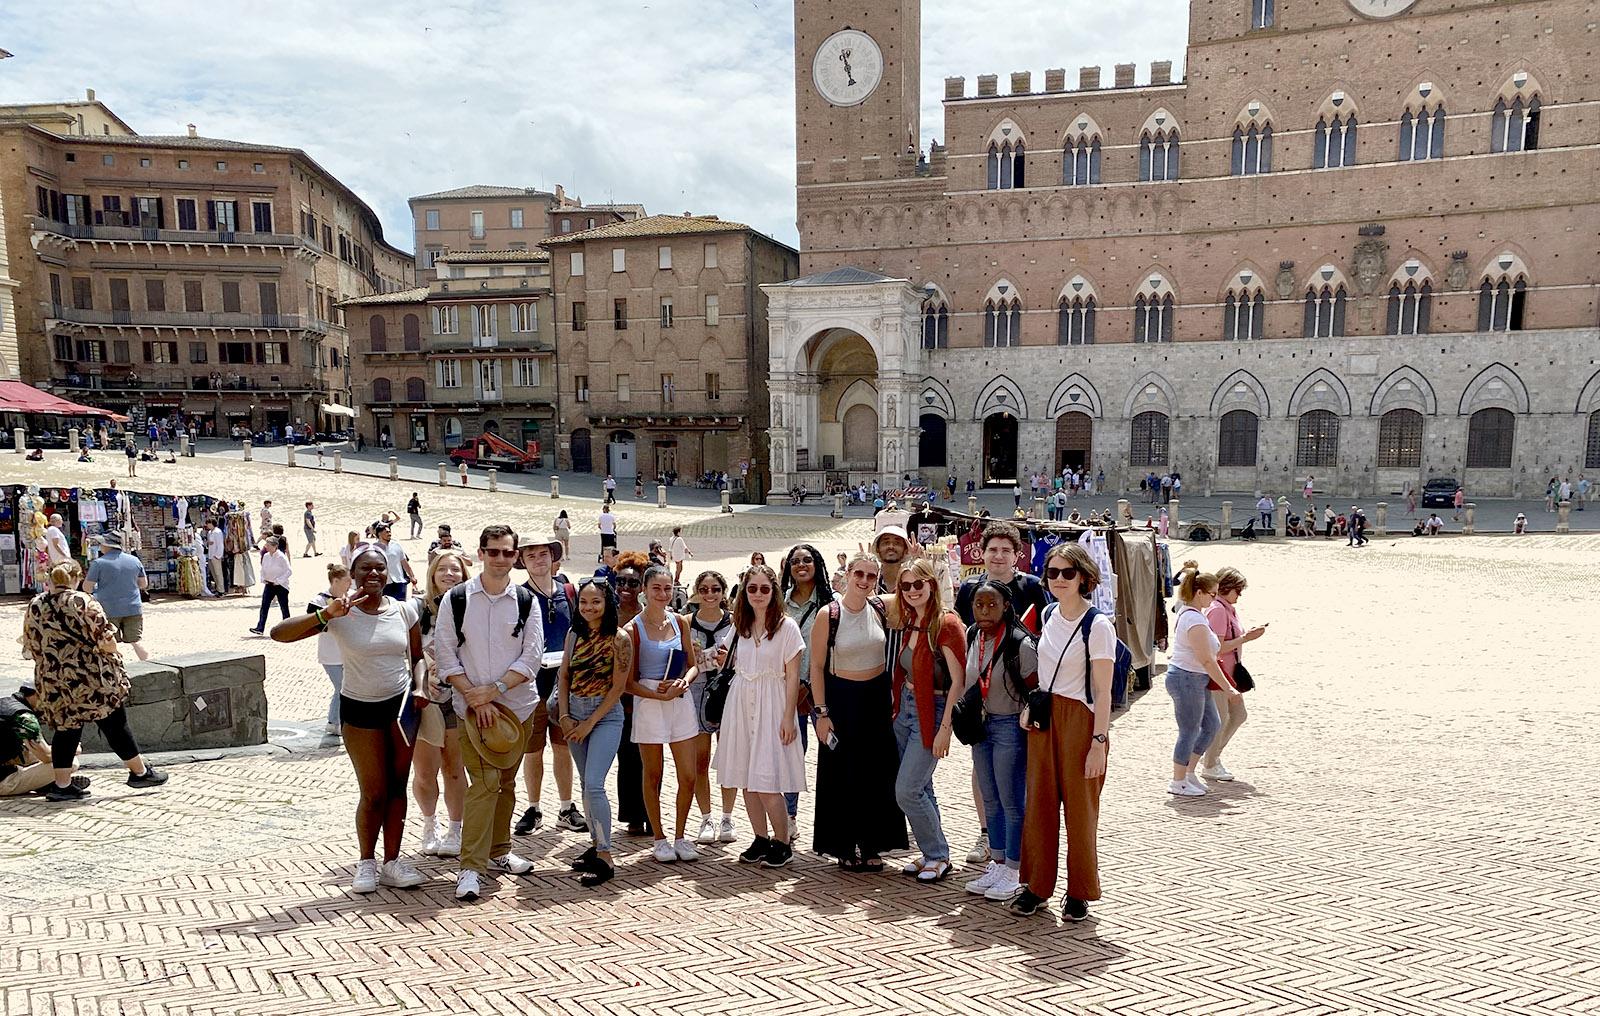 Students posing in a plaza in Siena, Italy